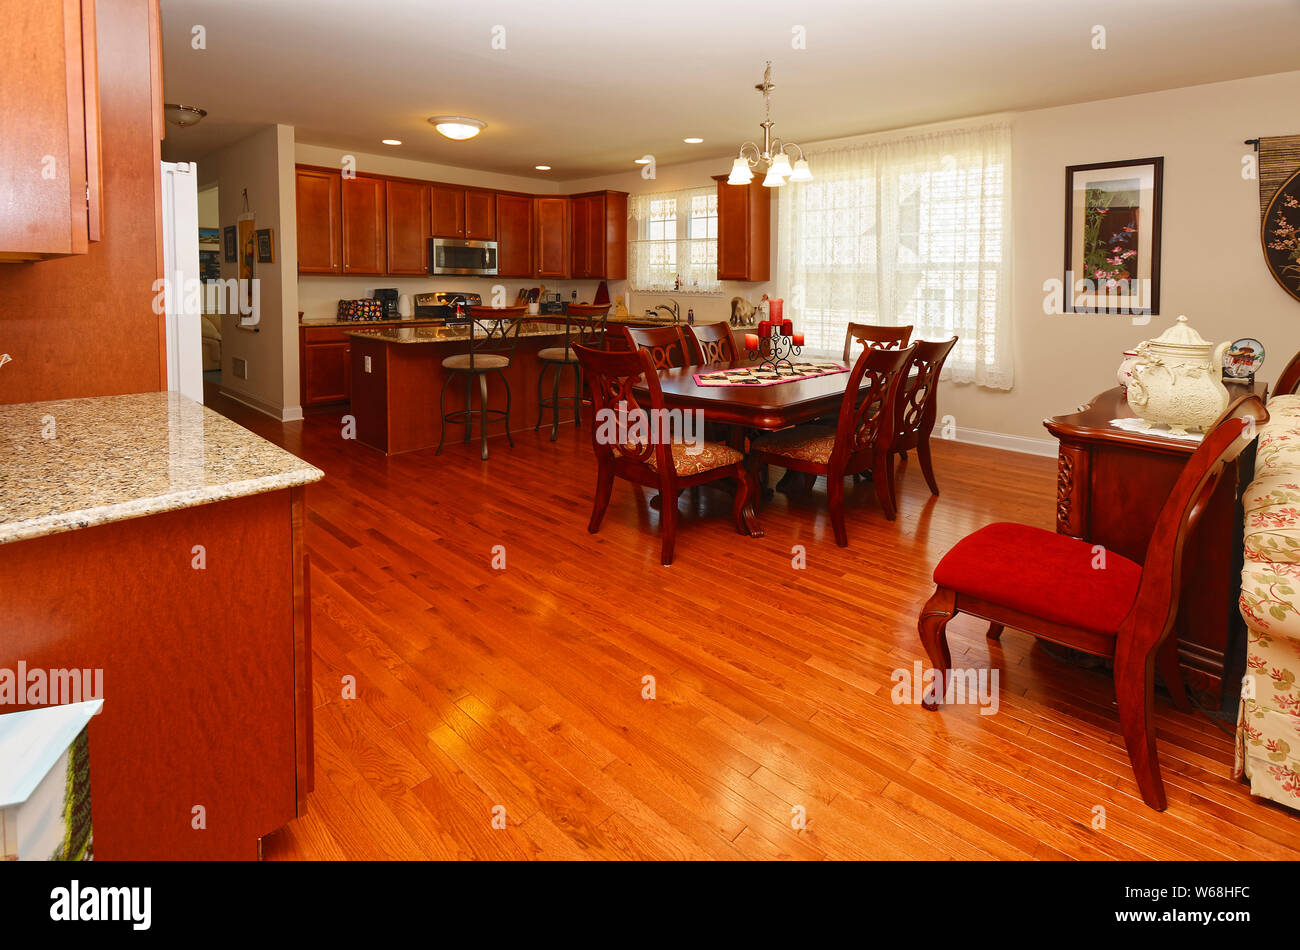 Wood Cabinets Stock Photos Wood Cabinets Stock Images Alamy